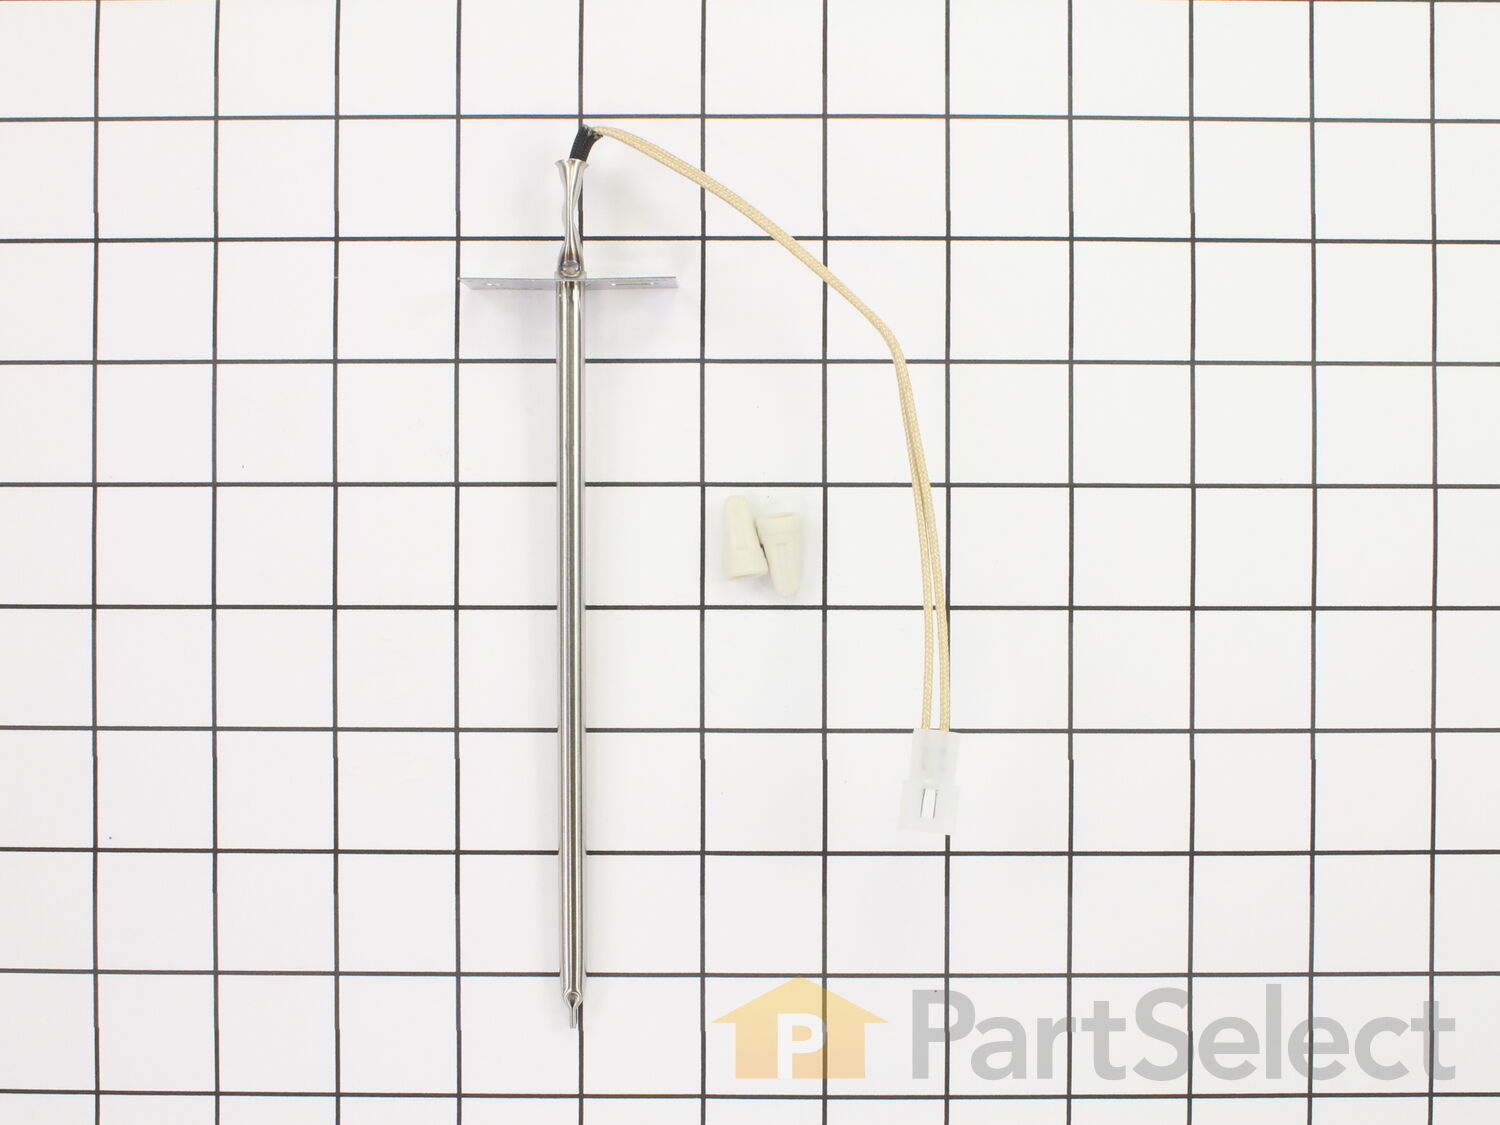 Details about   WP8053344  Oven Temperature Sensor Compatible With Whirlpool Stove Oven Ranges 